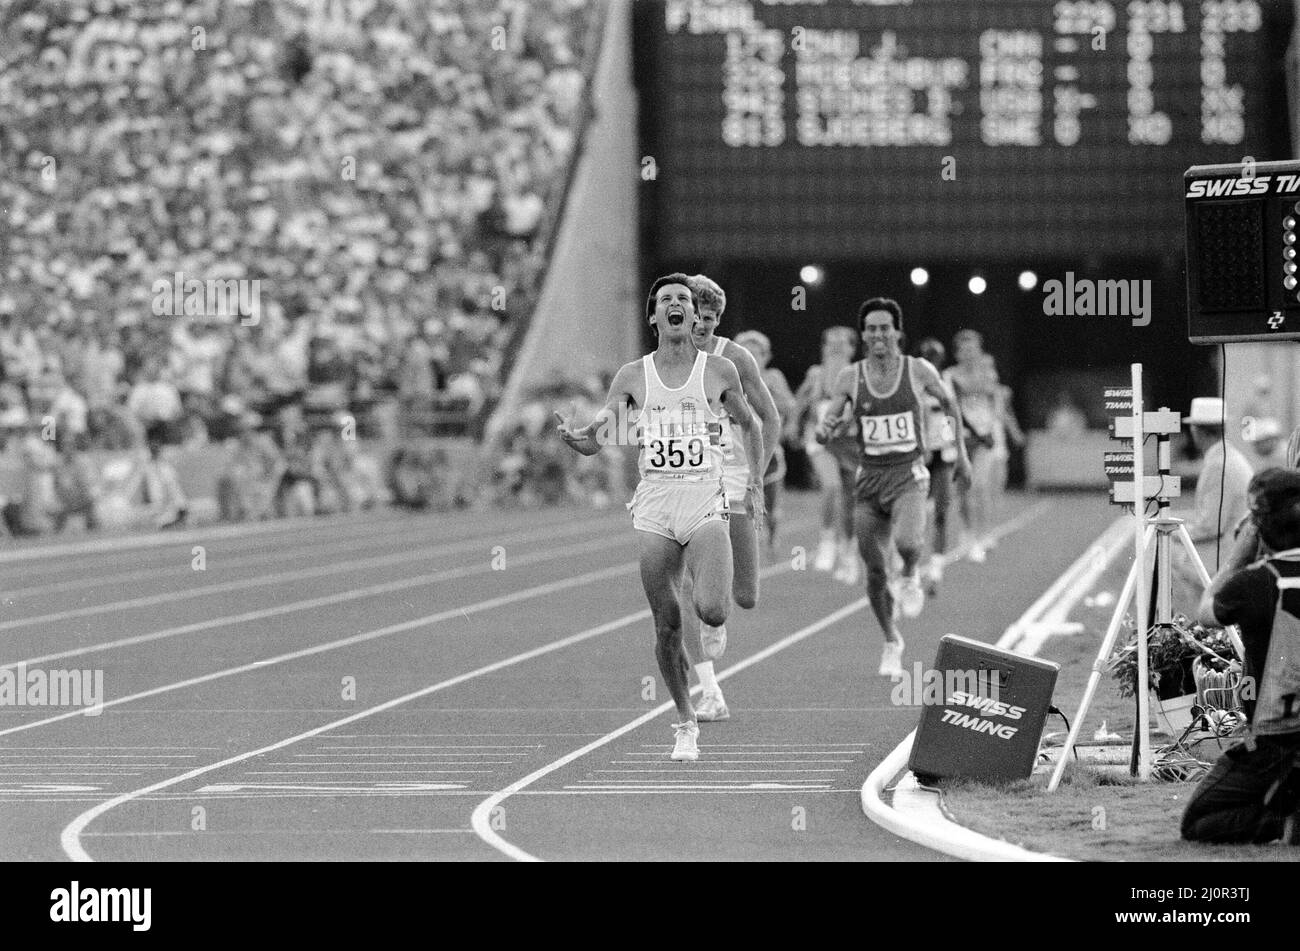 1984 Olympic Games in Los Angeles, USA.Mens Athletics. Great Britain's Sebastain Coe wins the 1500 metres gold medal ahead of his fellow countryman Steve Cram who took silver. 11th August 1984. Stock Photo